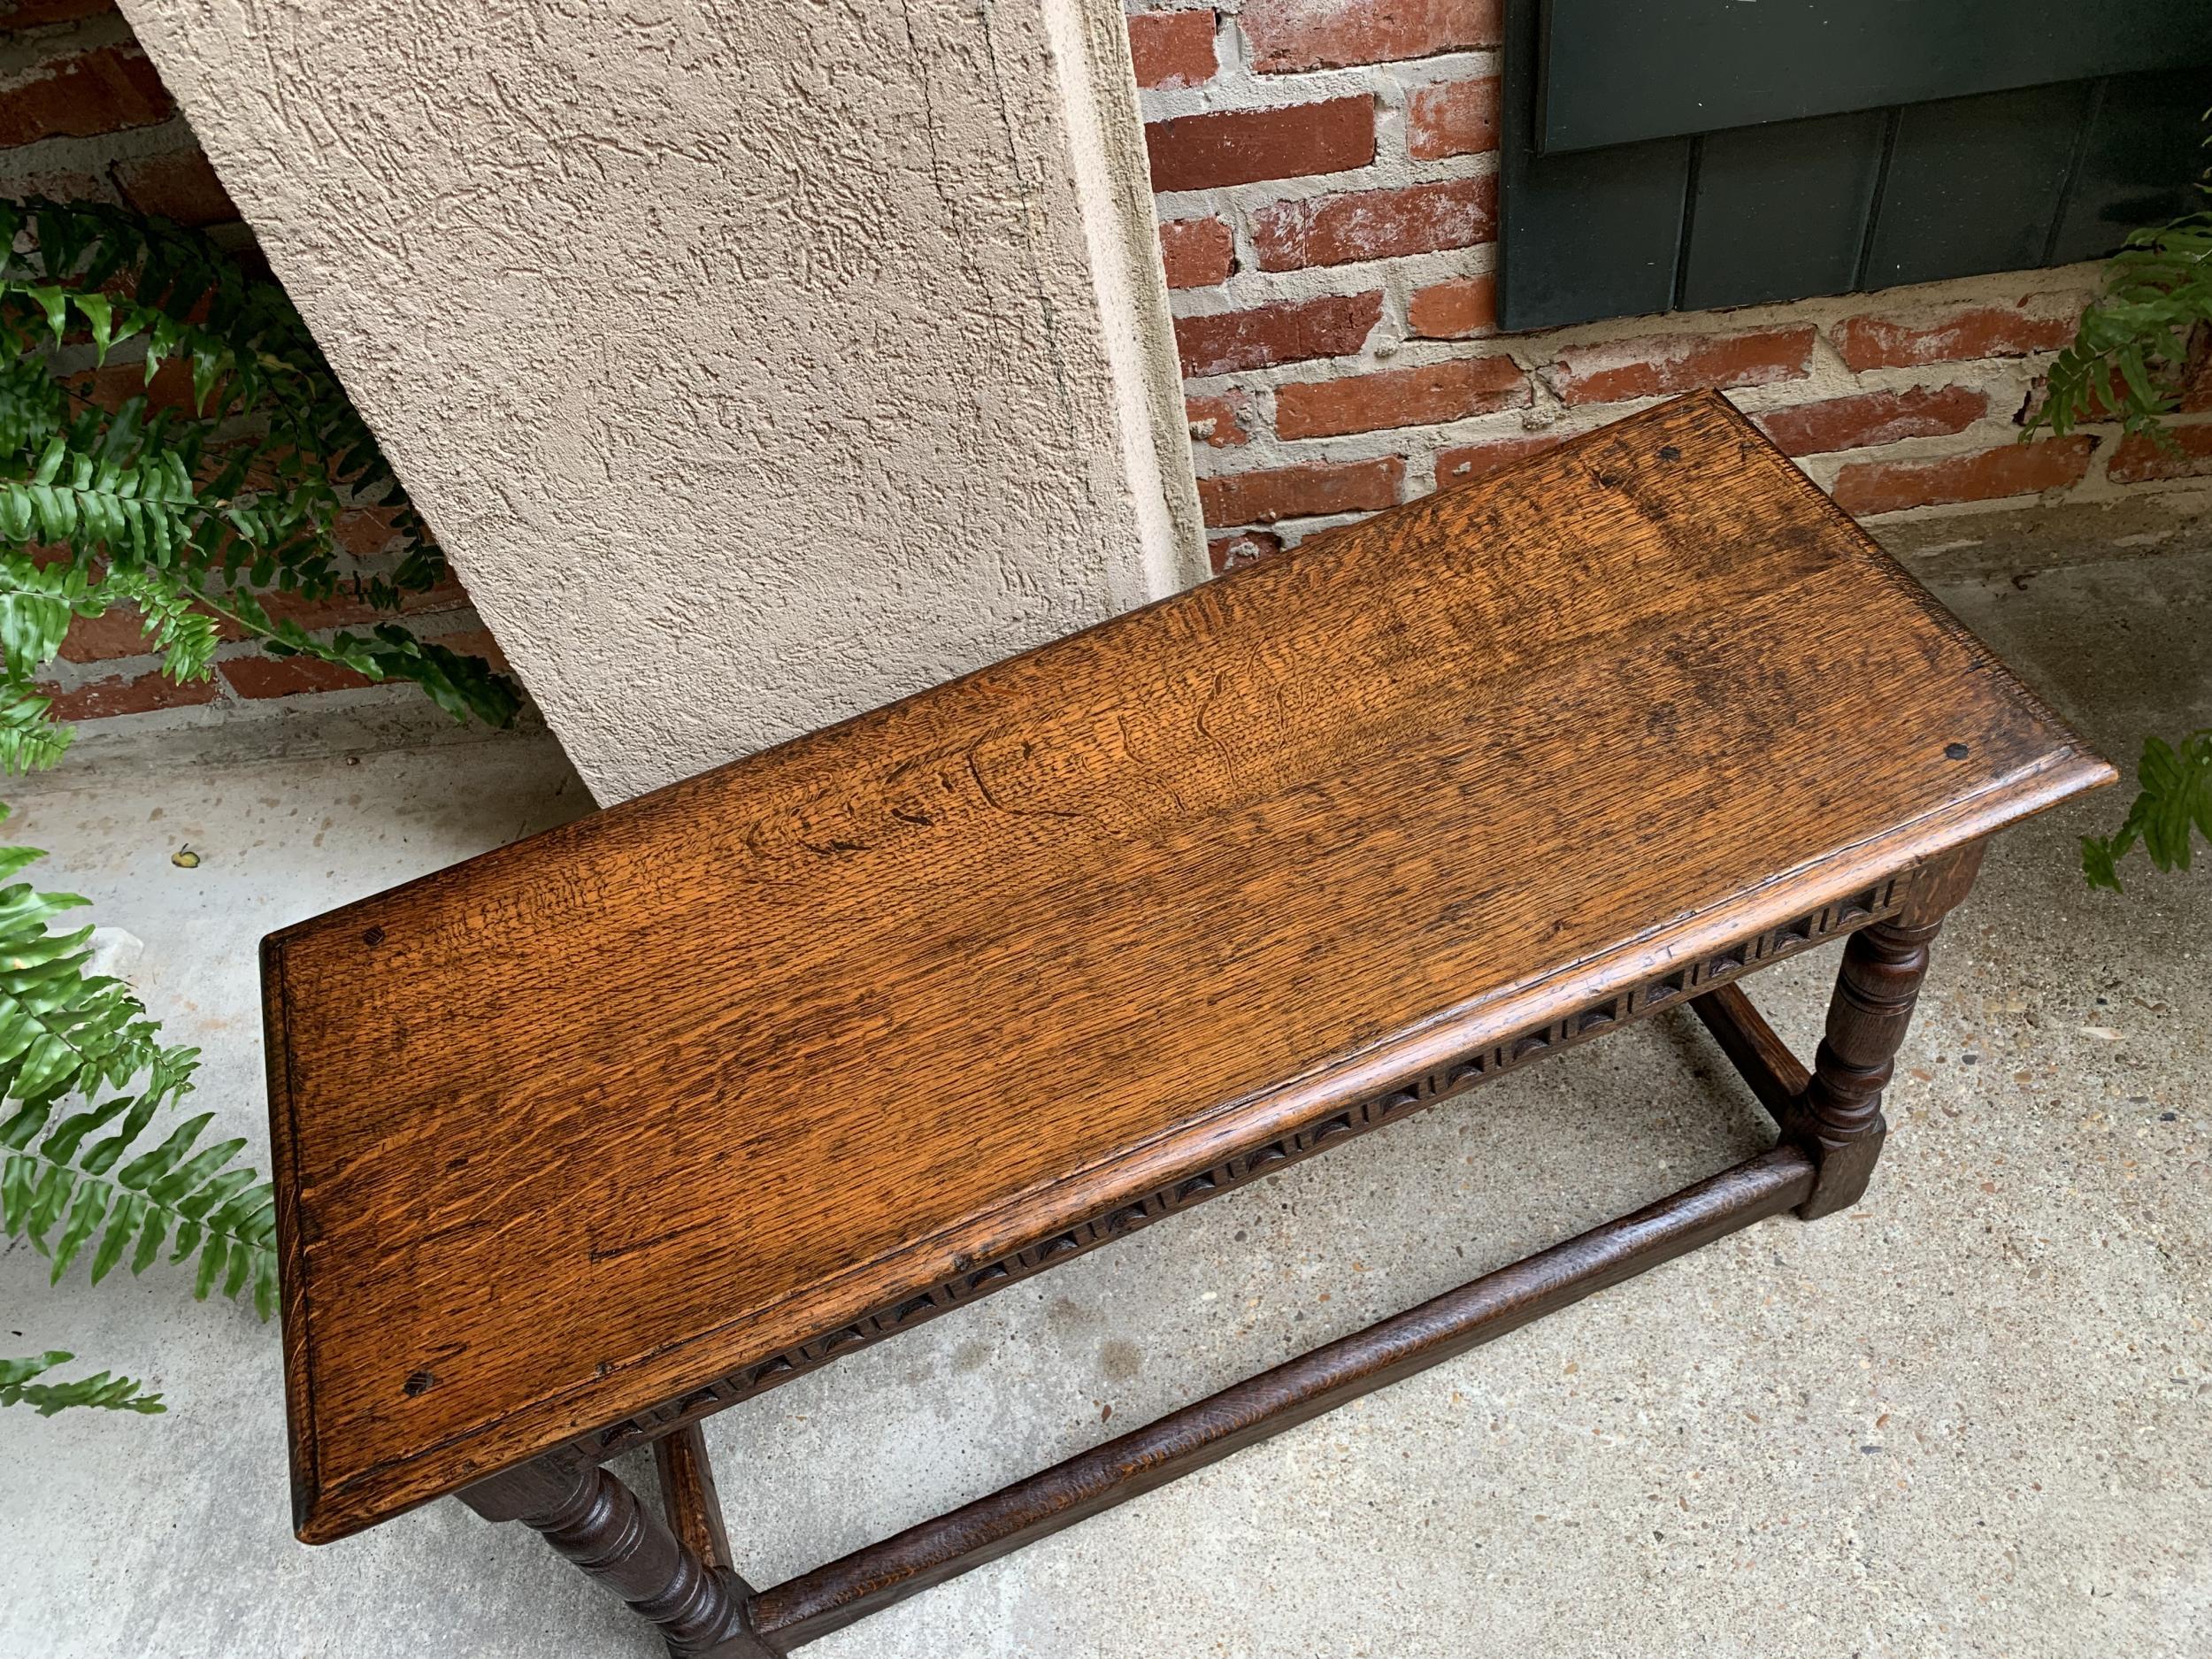 Early 20th Century Antique English Carved Oak Pegged Joint Stool Duet Bench Window Seat, c1900